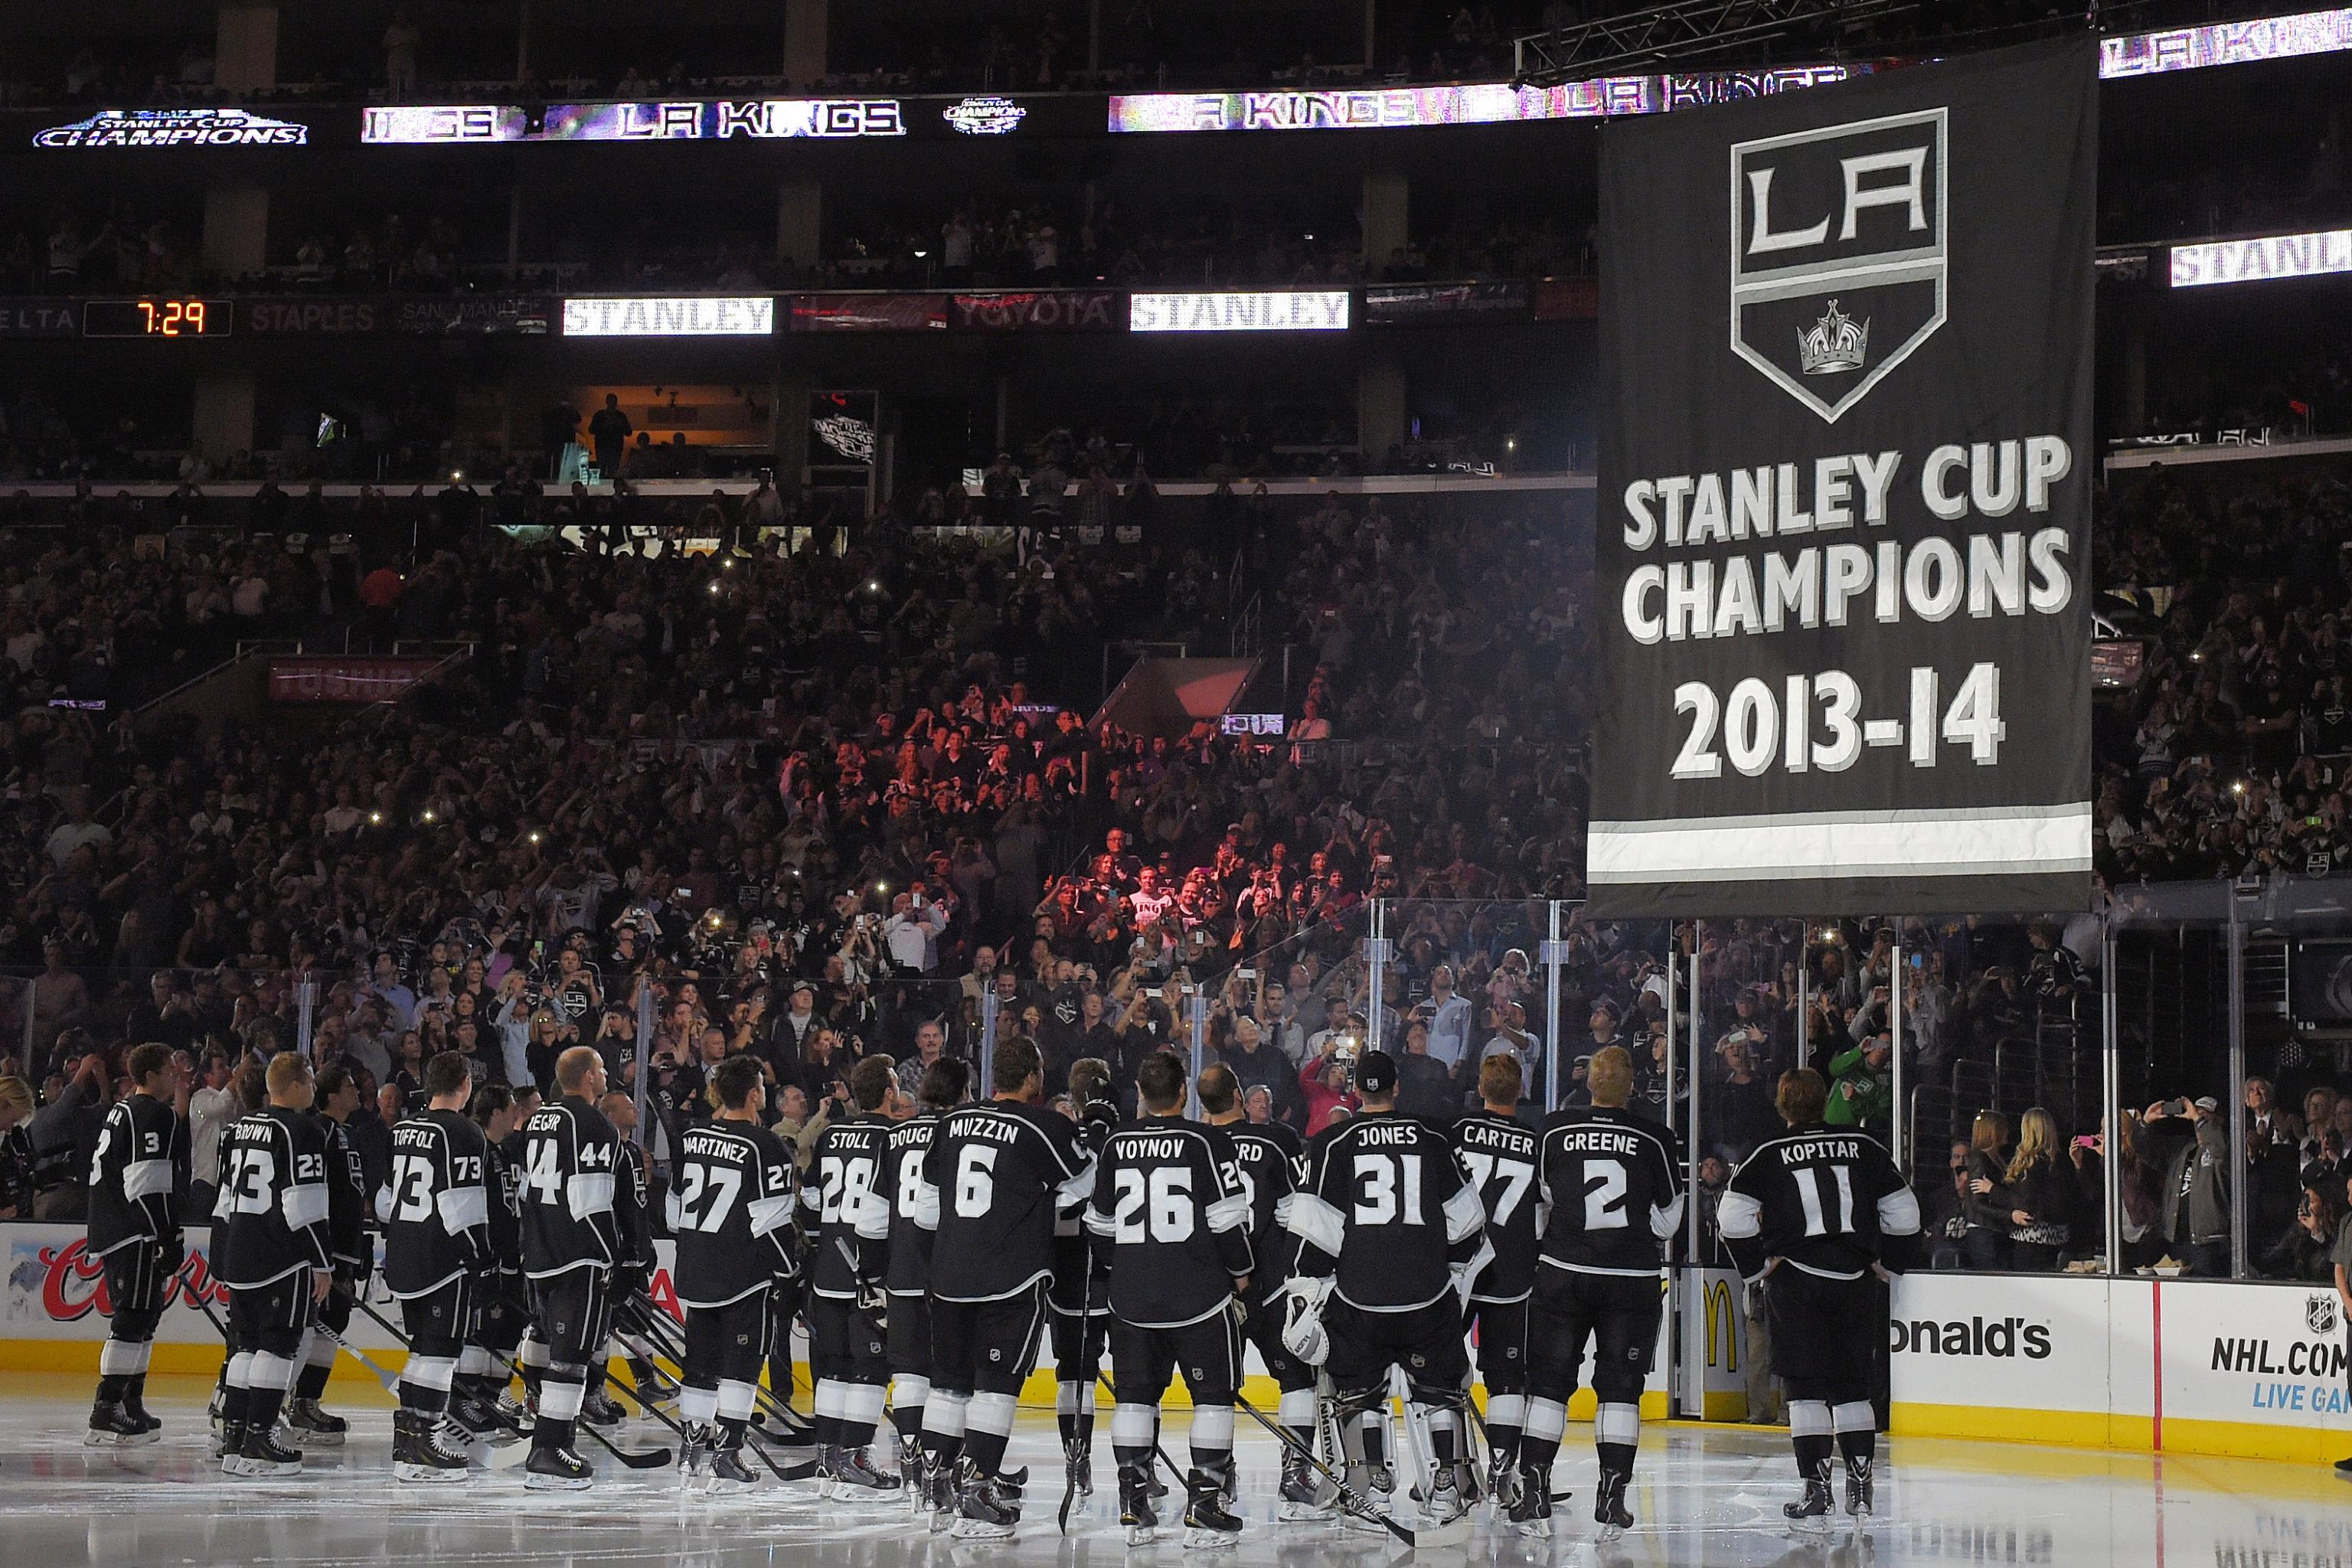 WATCH: Kings Raise Championship Banner, Lower Stanley Cup